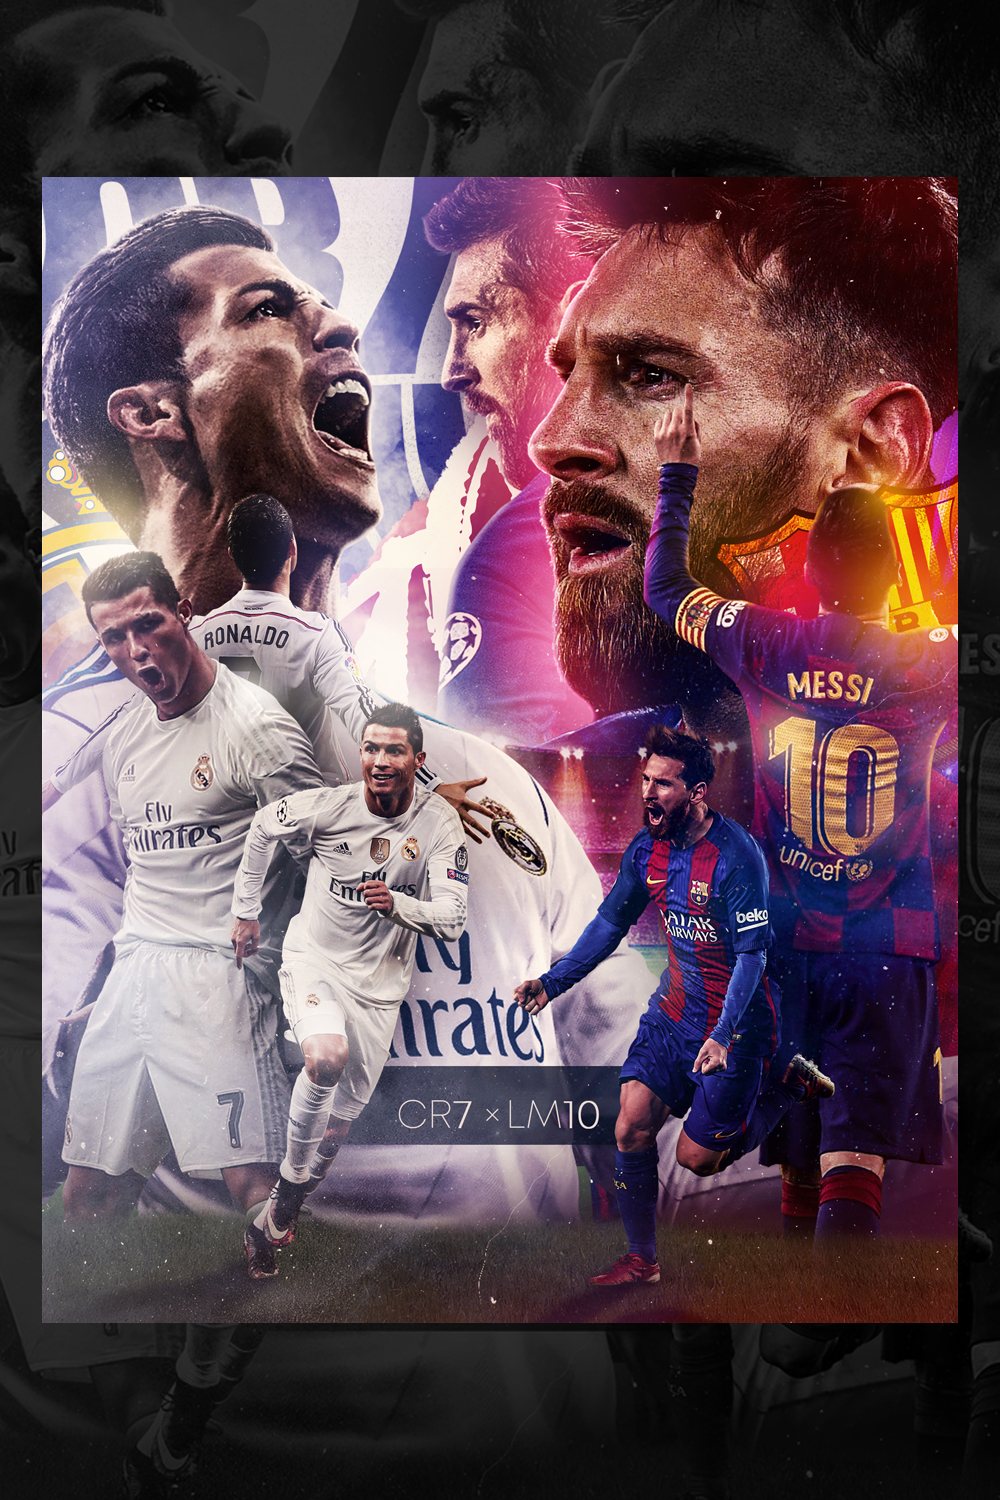 Best Football Posters, High Quality and full resolution, Fill your room with high quality posters!! pinterest preview image.